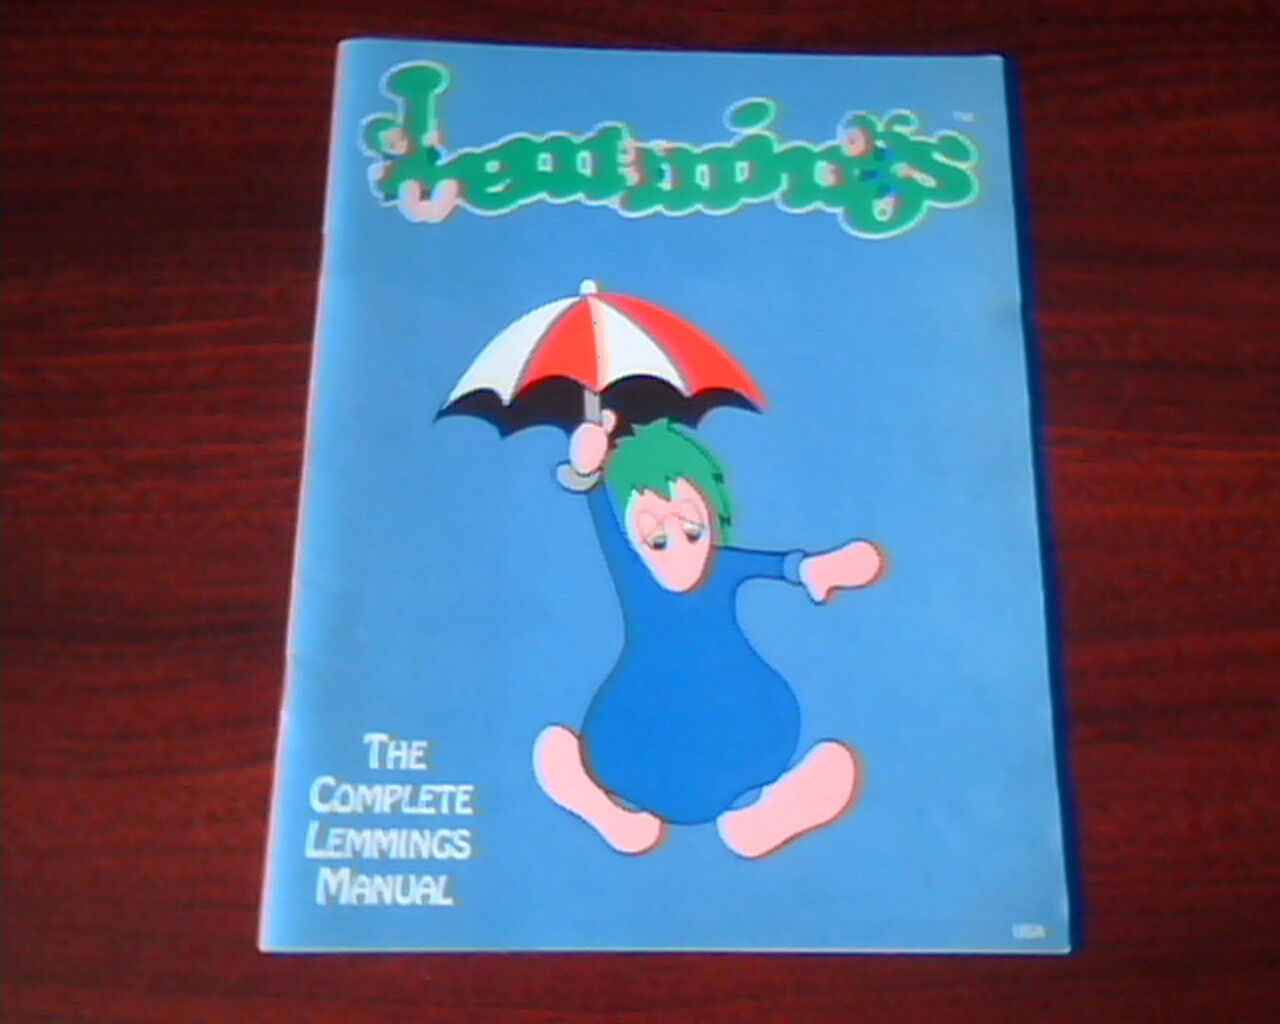 Lemmings - The Complete Lemmings Manual - Psygnosis color vintage game booklet